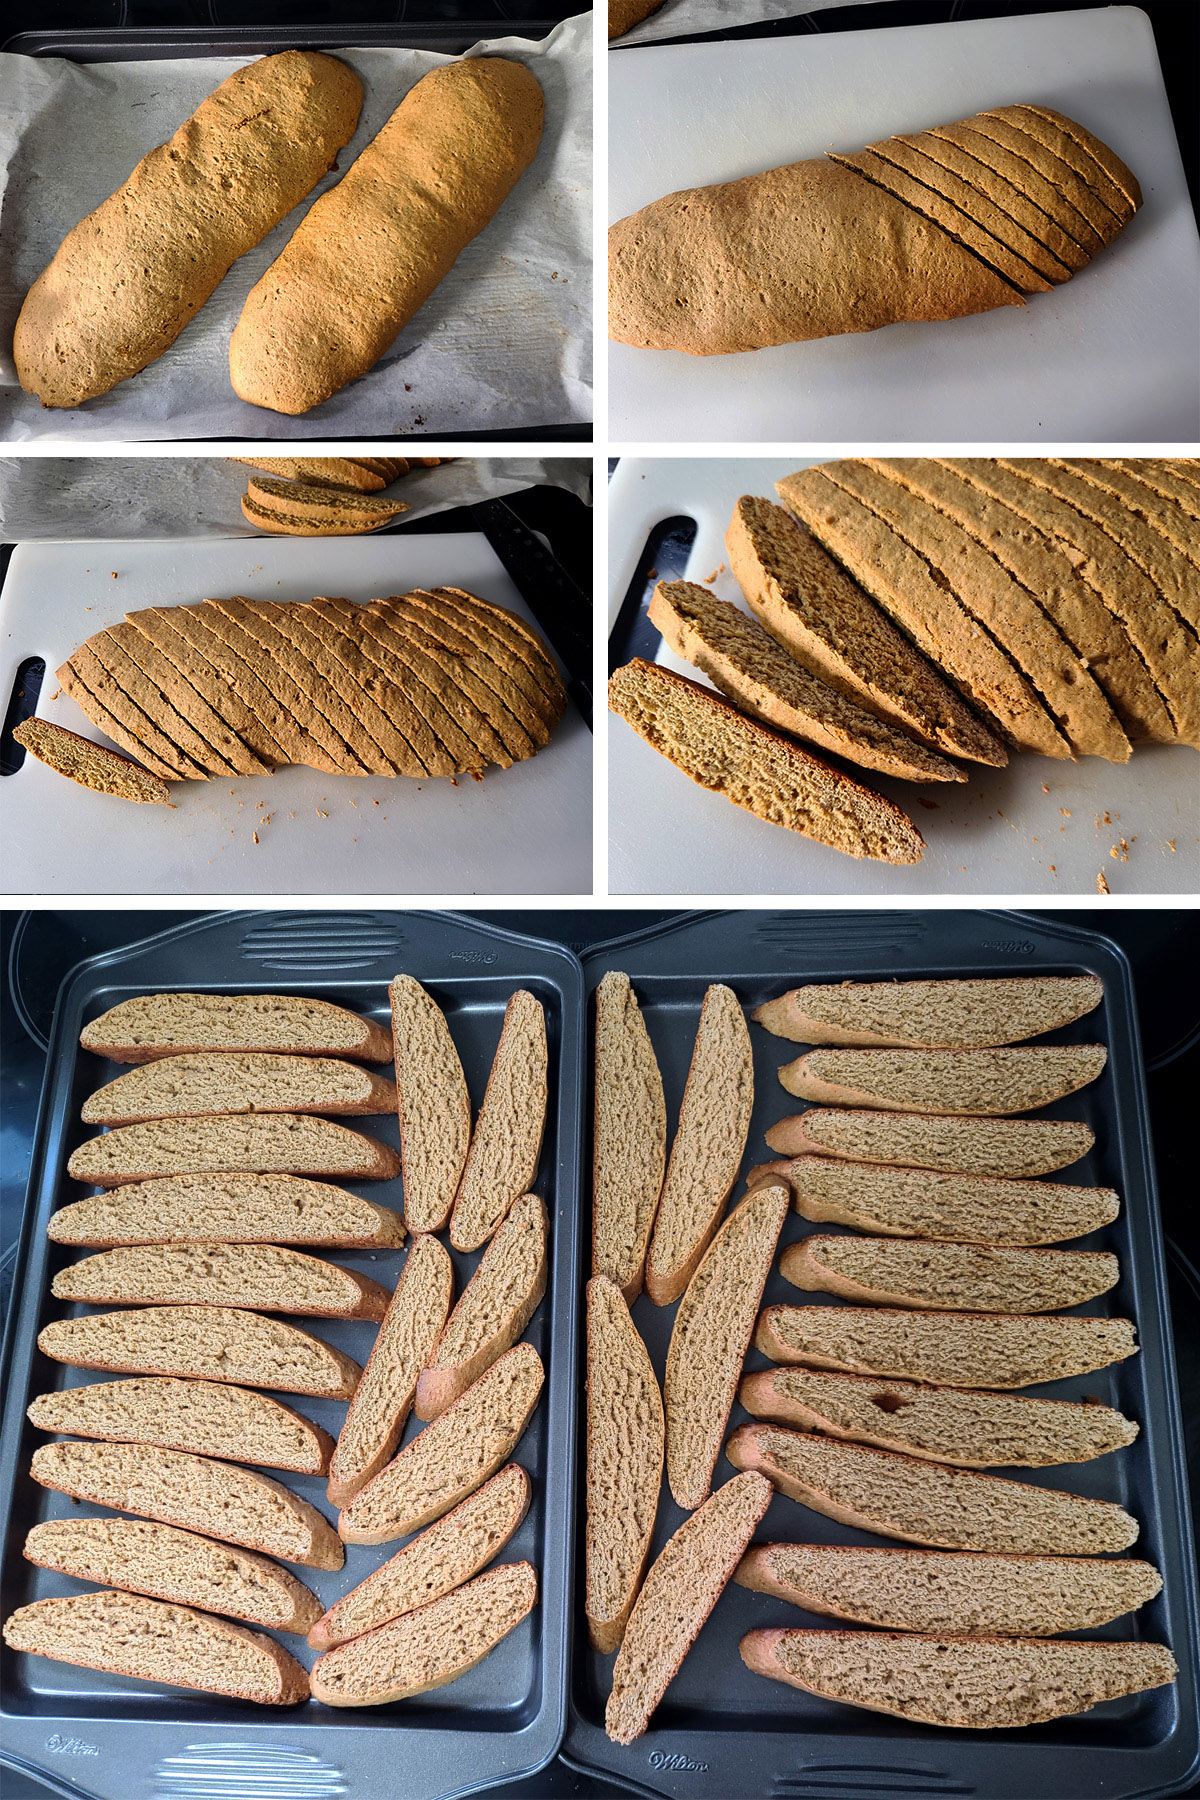 A 6 part image showing the baked biscotti loaves being sliced and arranged on baking sheets.